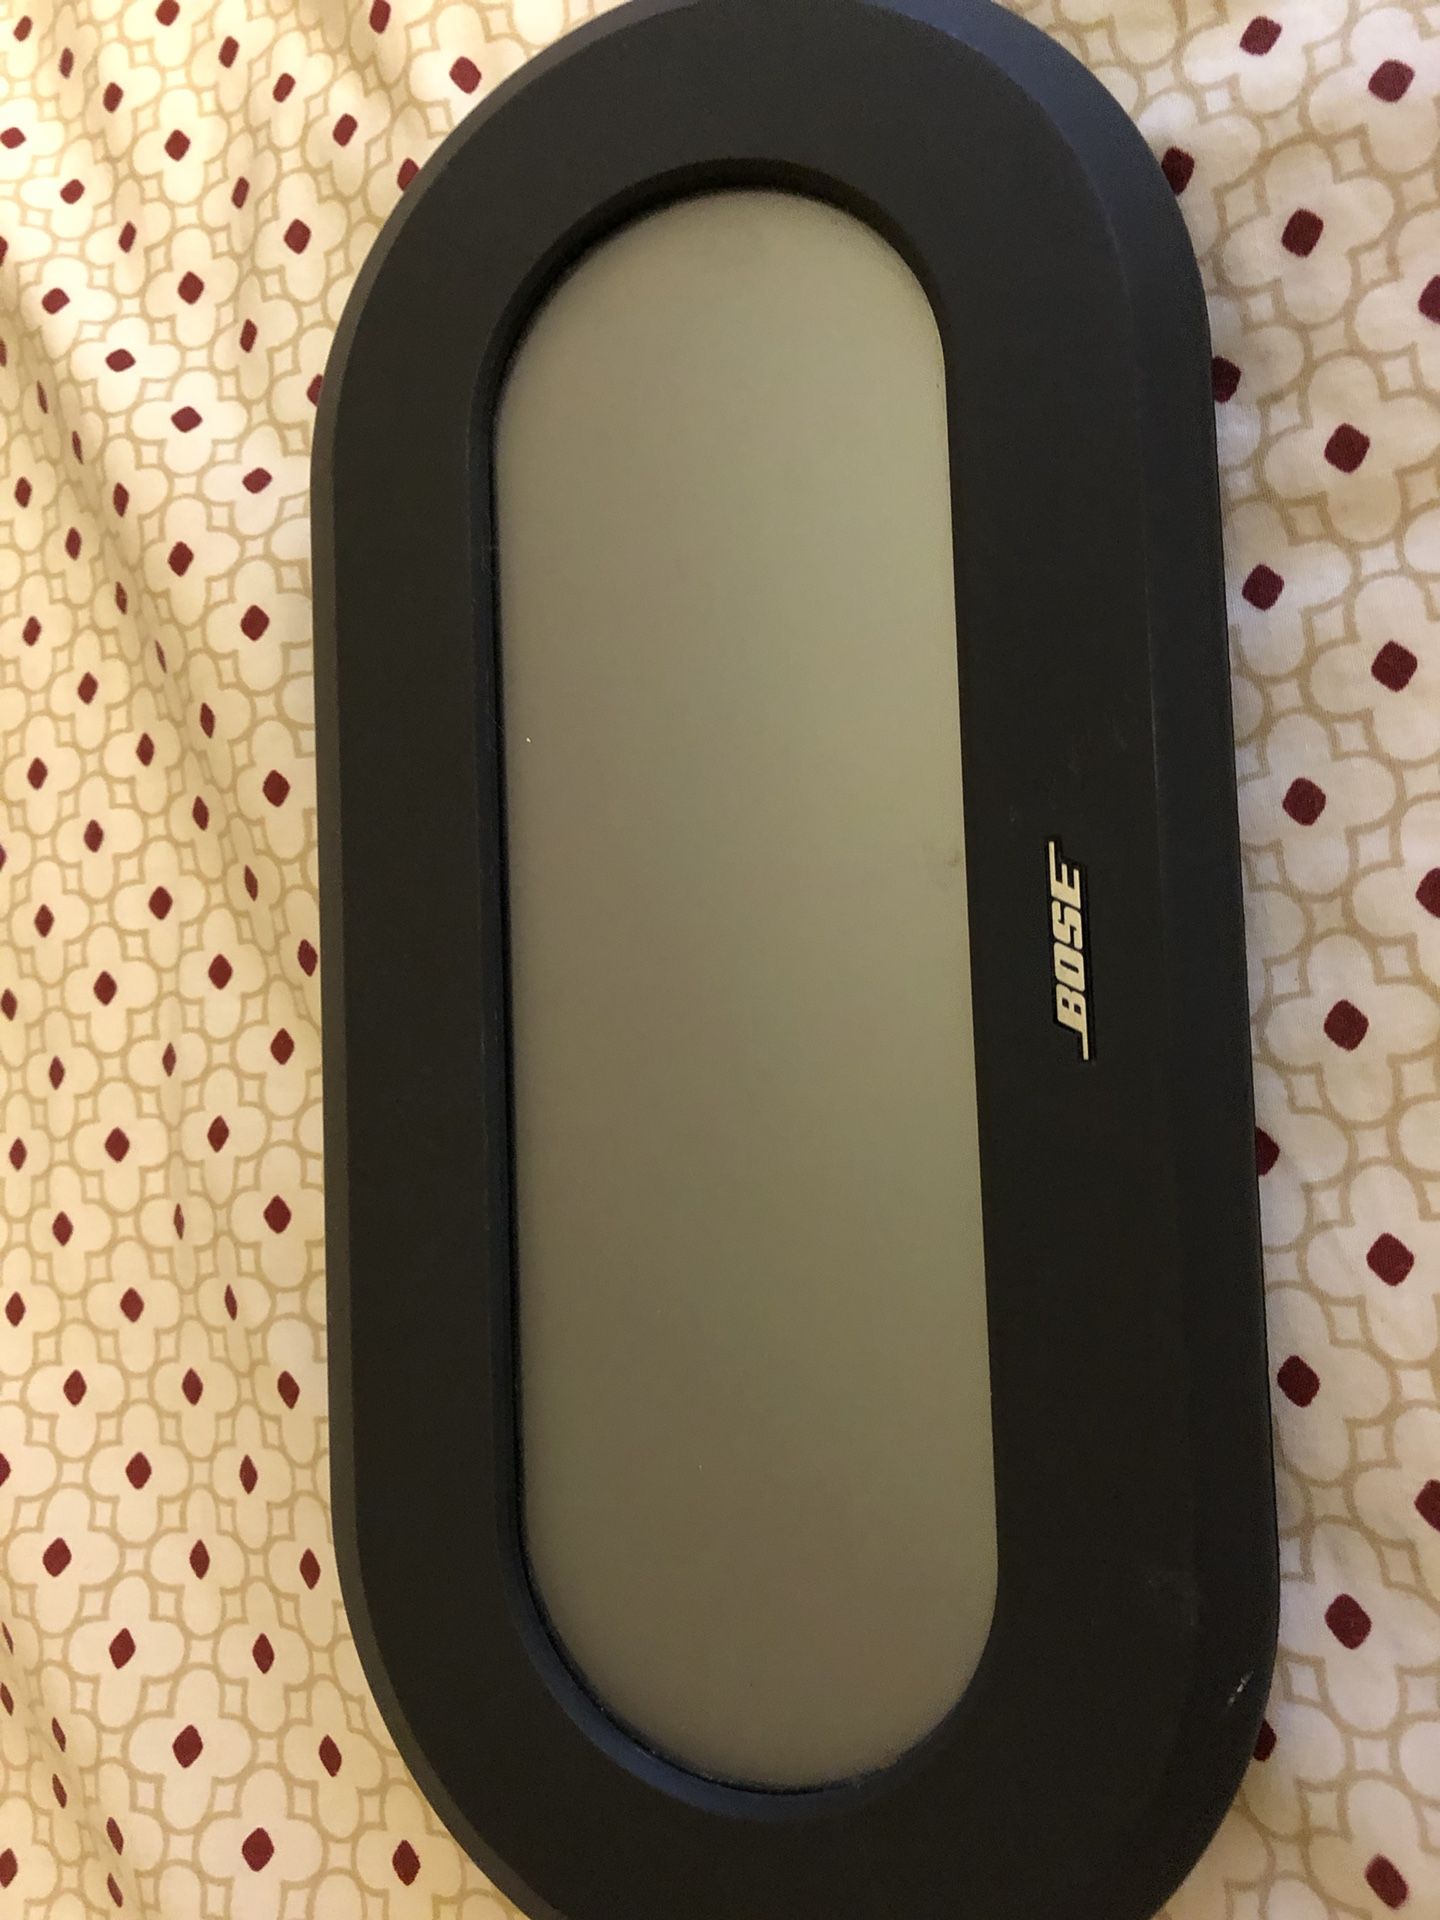 Bose p1 personal music center